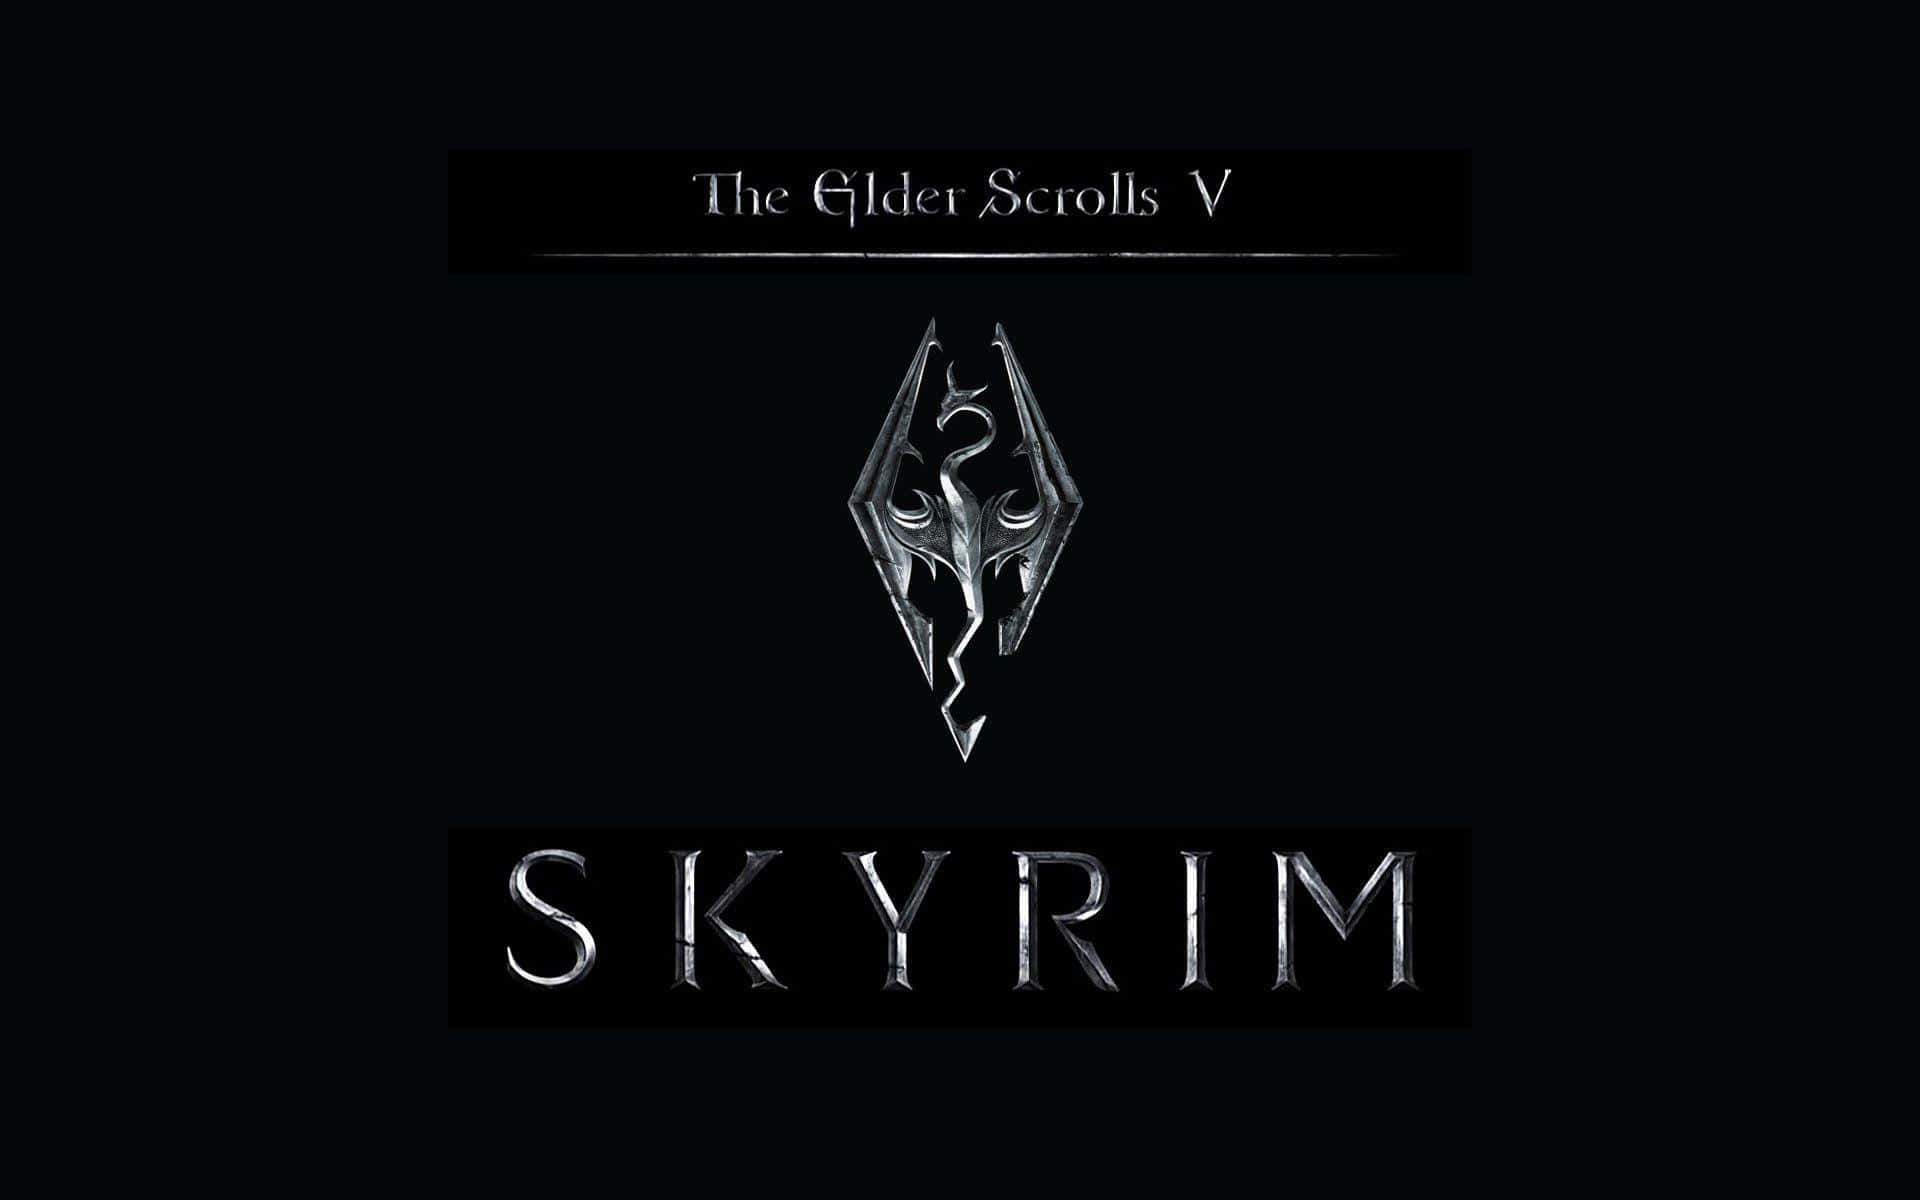 The Dragonborn stands tall amid the breathtaking open world of The Elder Scrolls V: Skyrim